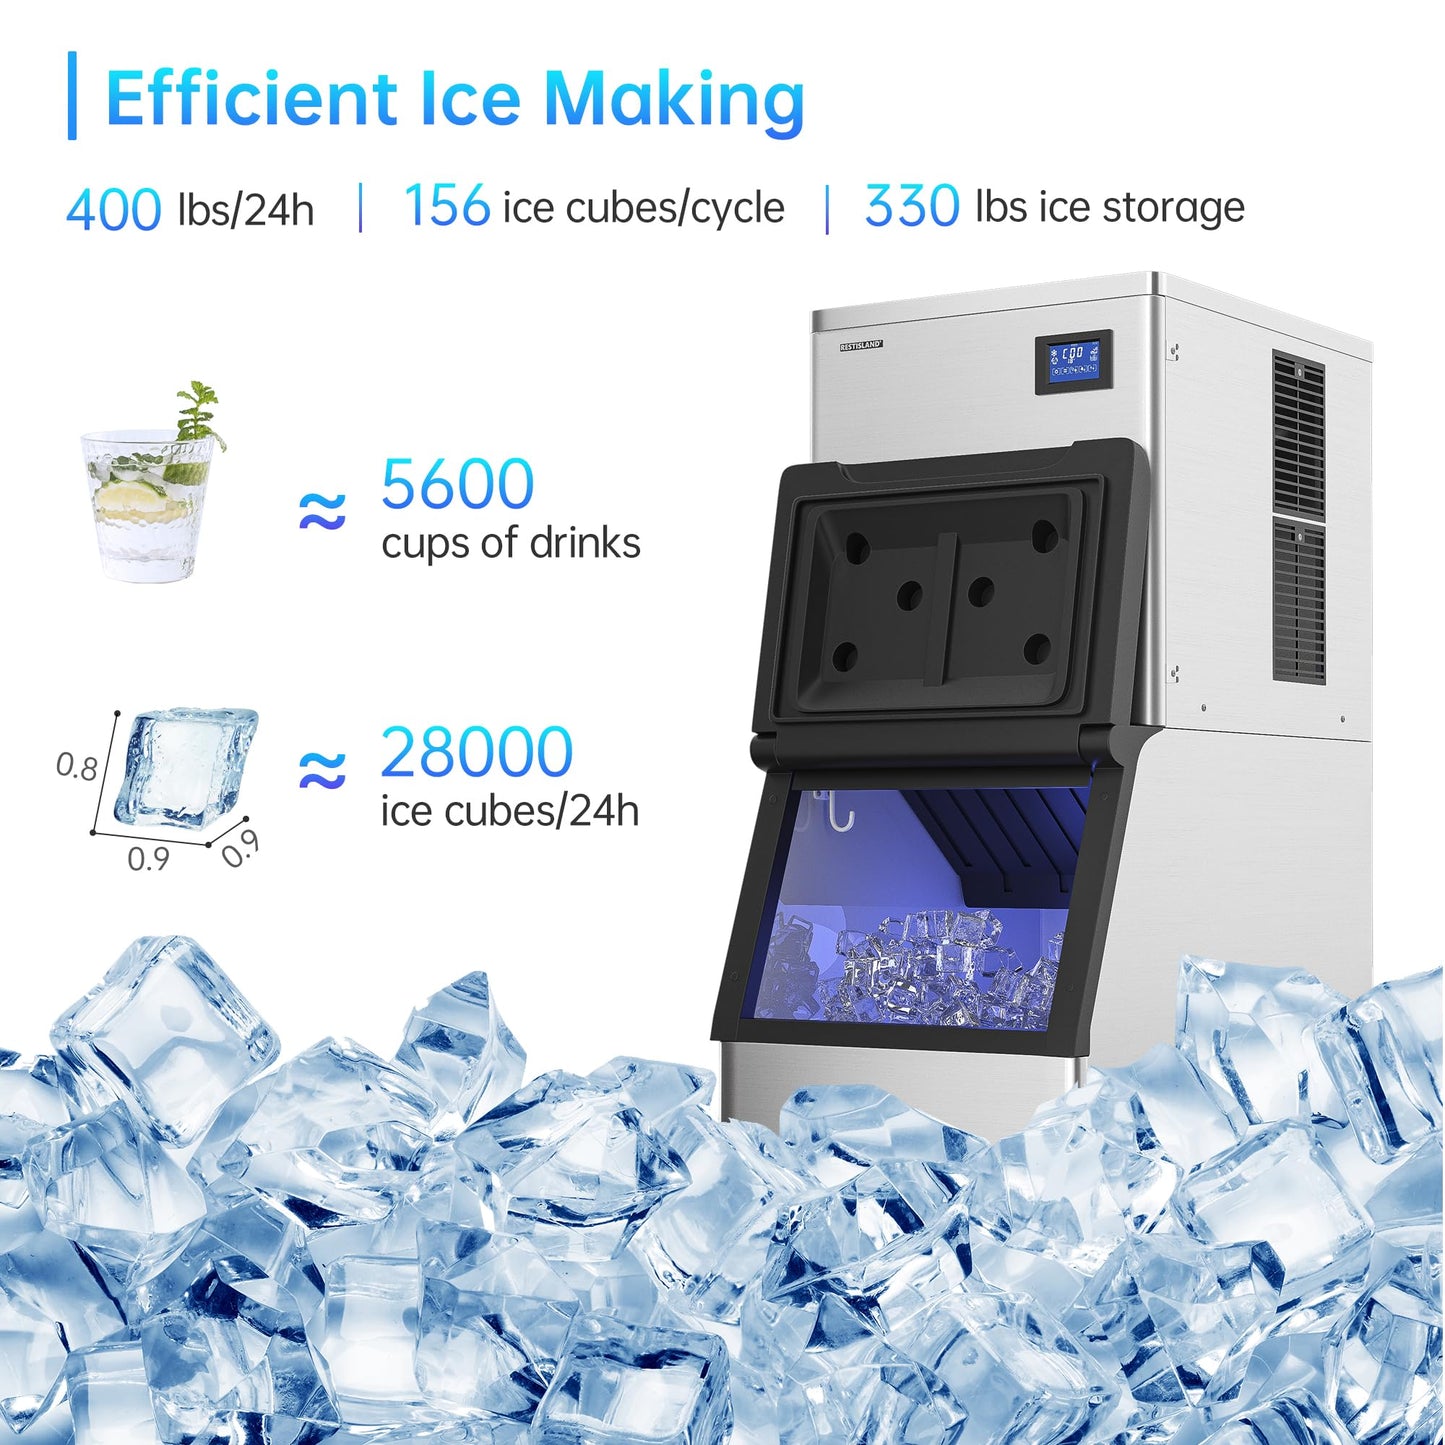 RESTISLAND Commercial Ice Maker Machine, 400 lbs /24 h, 330 lbs Storage Bin, Stainless Steel, Automatic Cleaning, Blue Ray, Perfect for Bar or Business, Includes Ice Shovel, Connection Hose